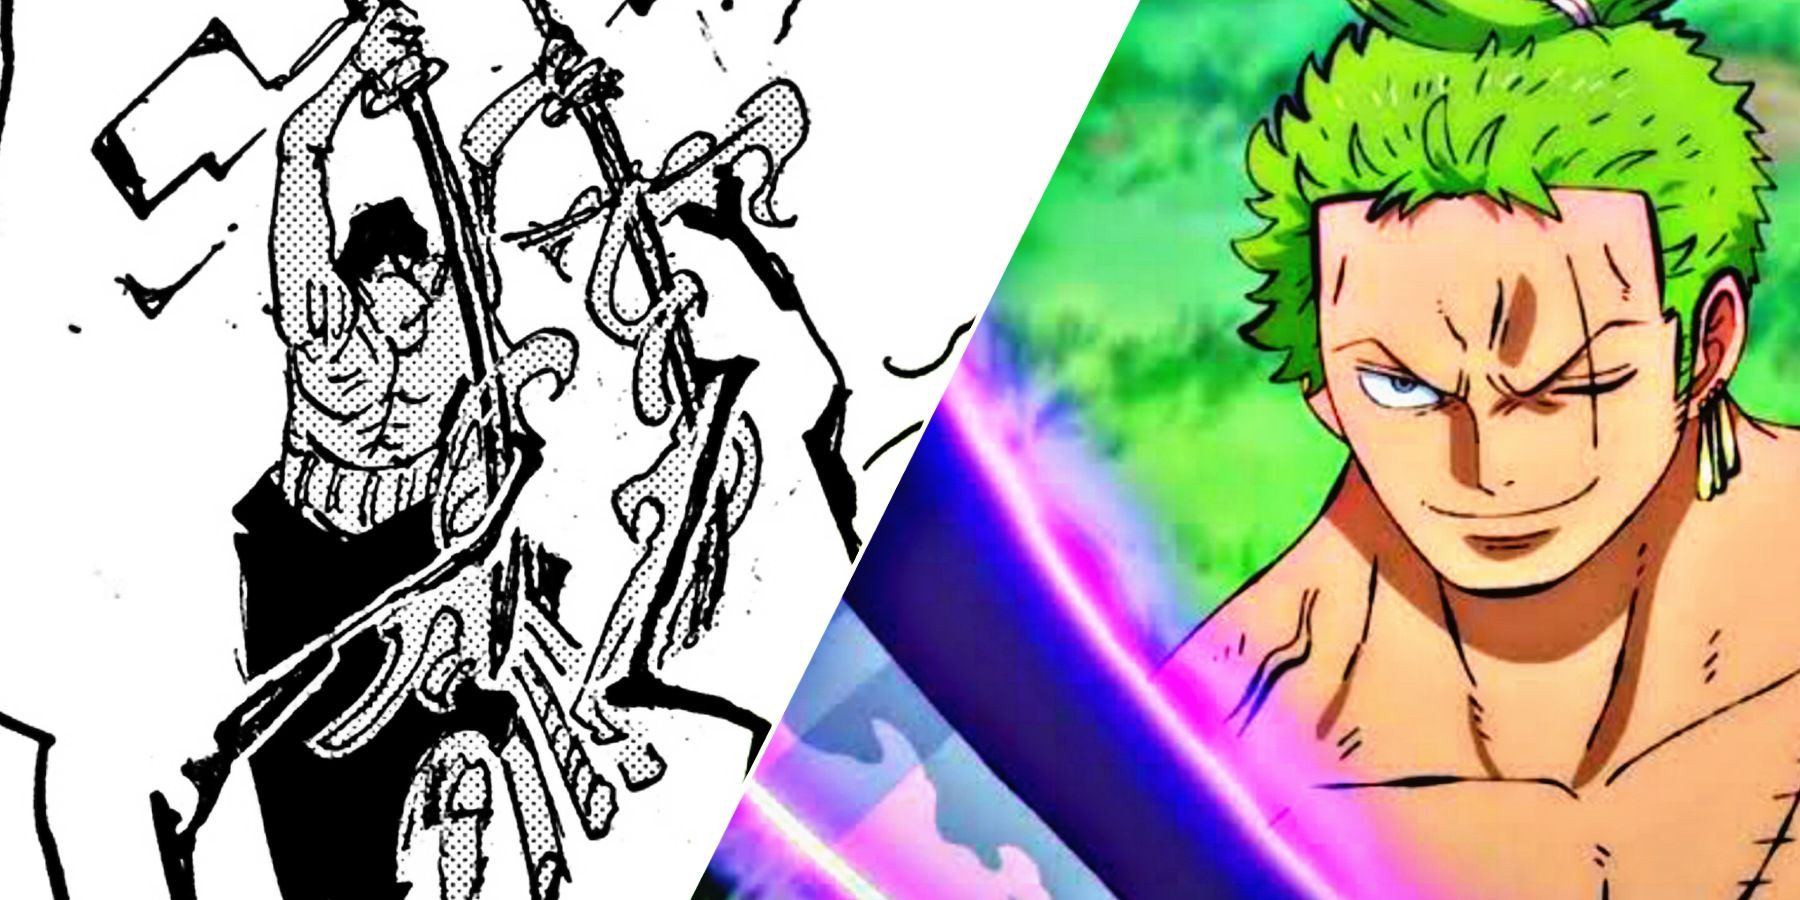 Given how easily Zoro beat King, is it safe to say that he was